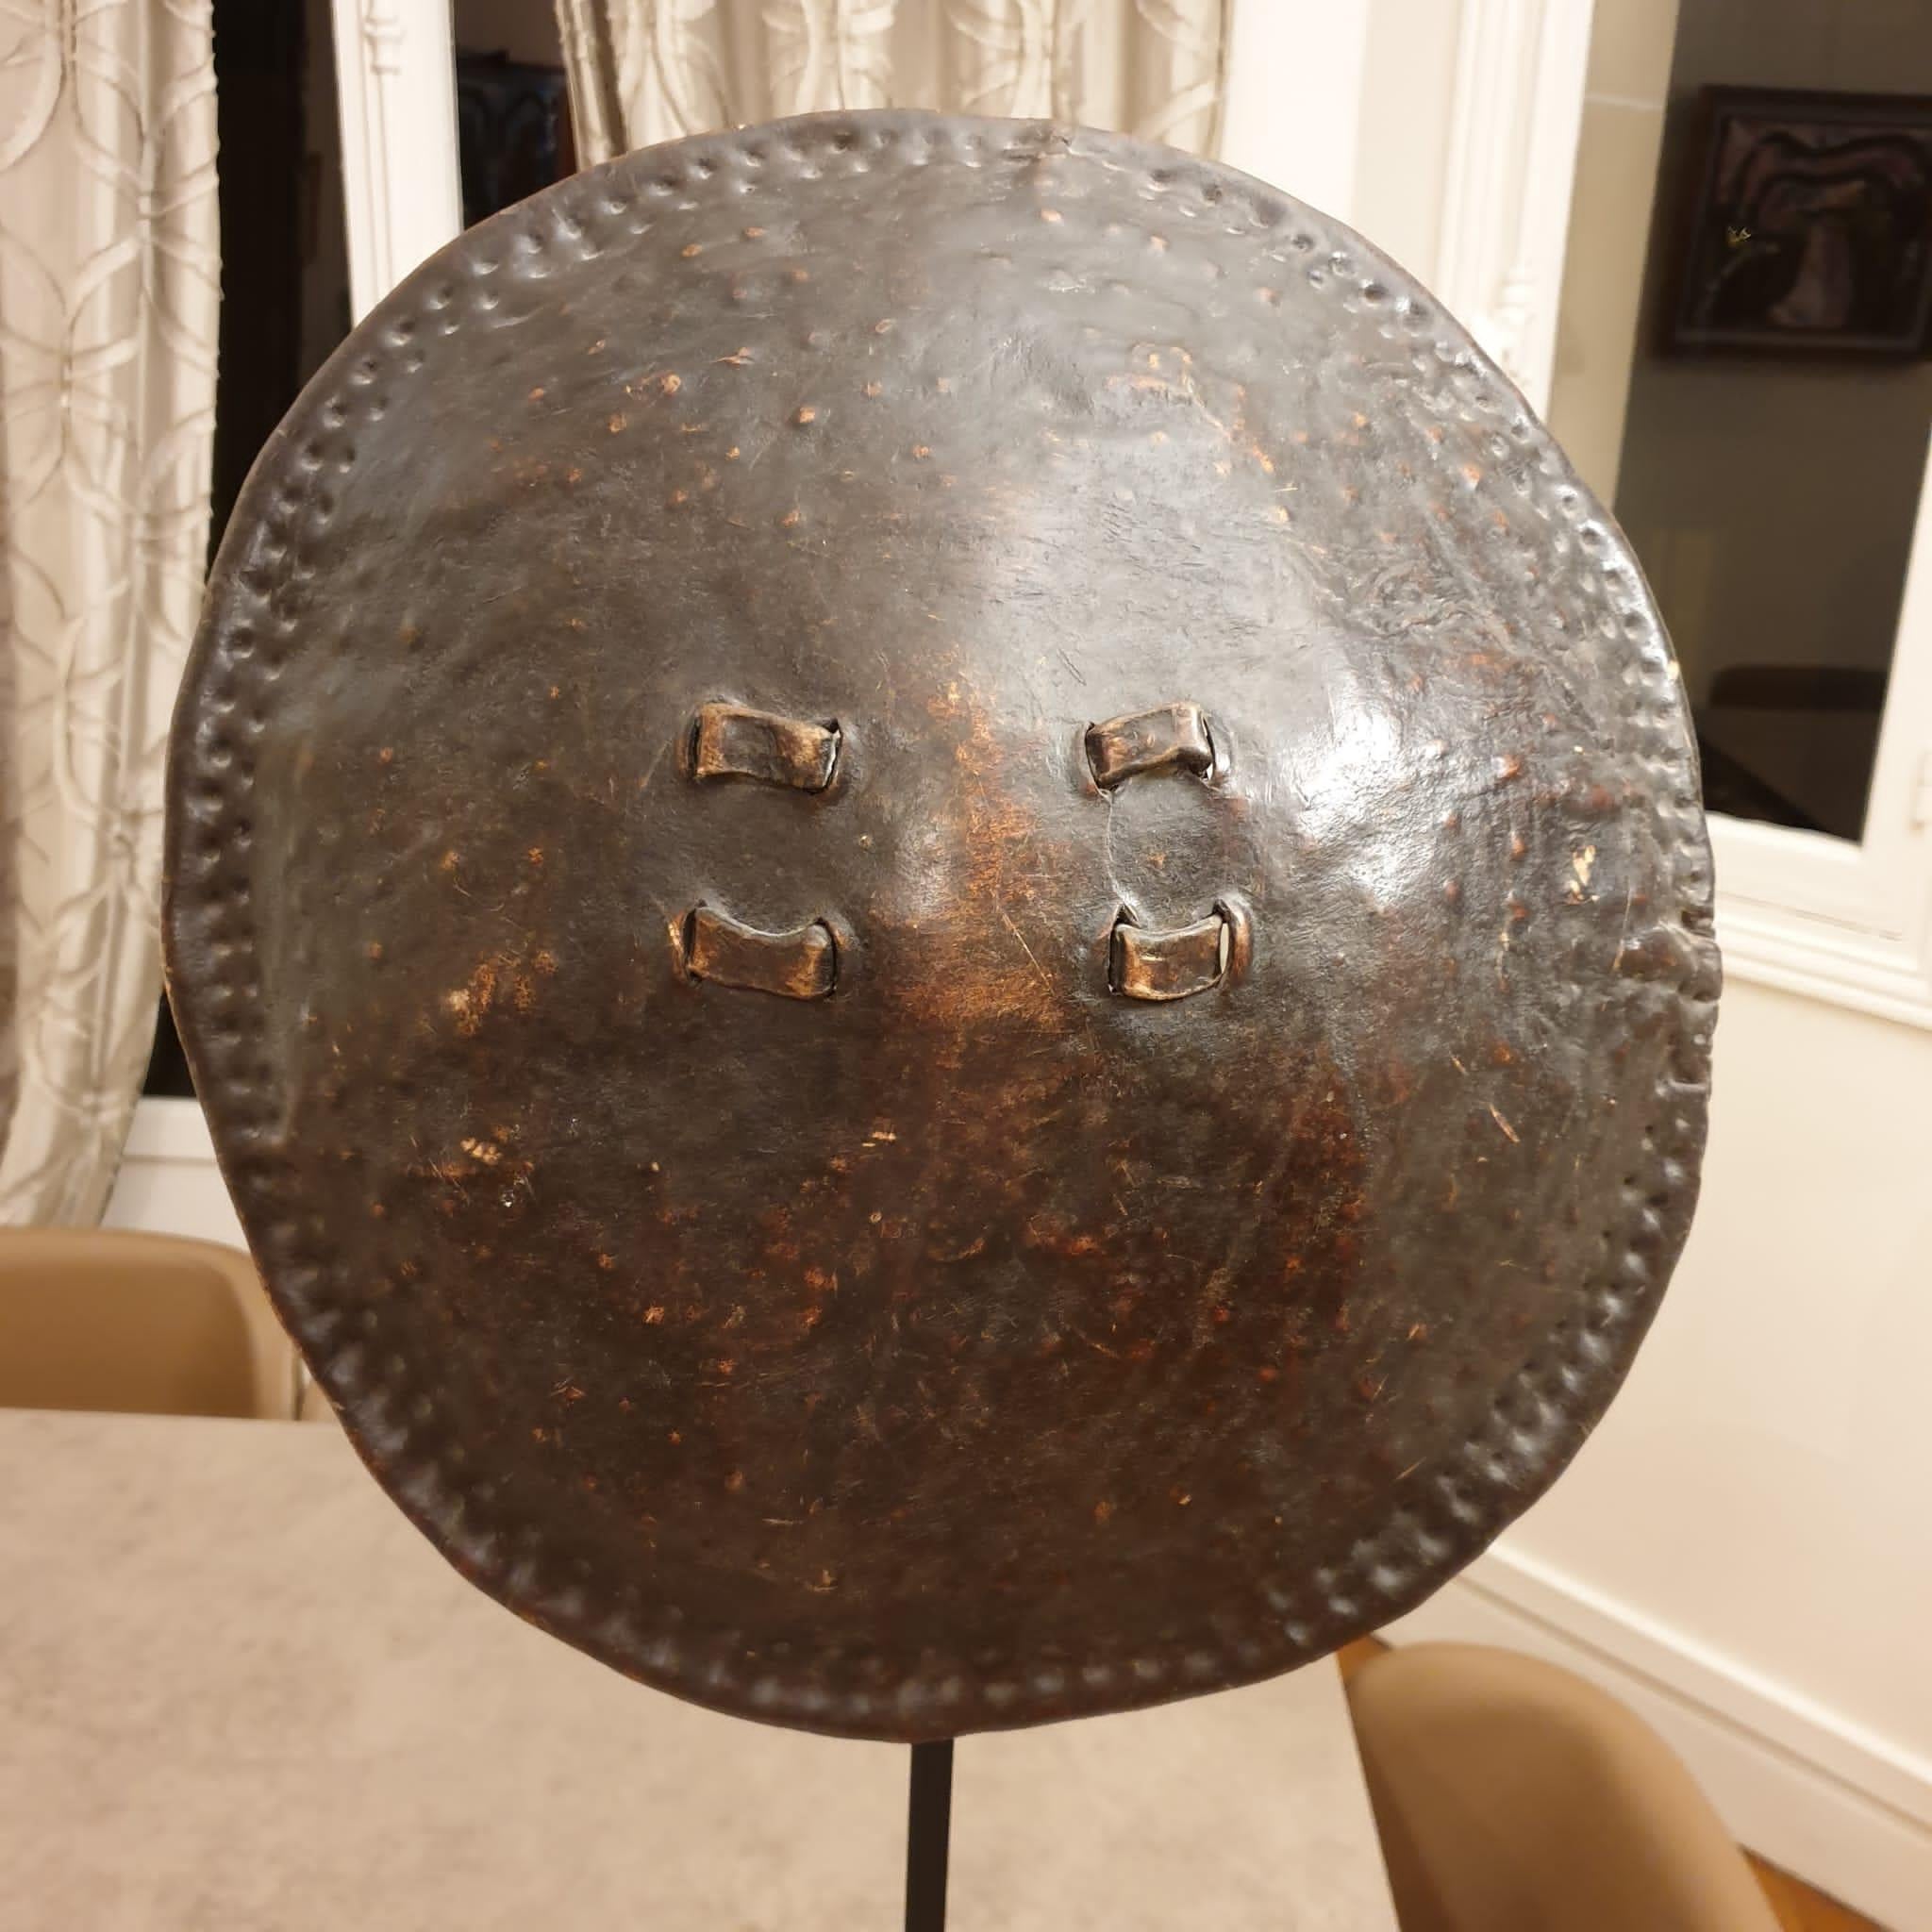 Amhara Shield, African art  - Art by Unknown